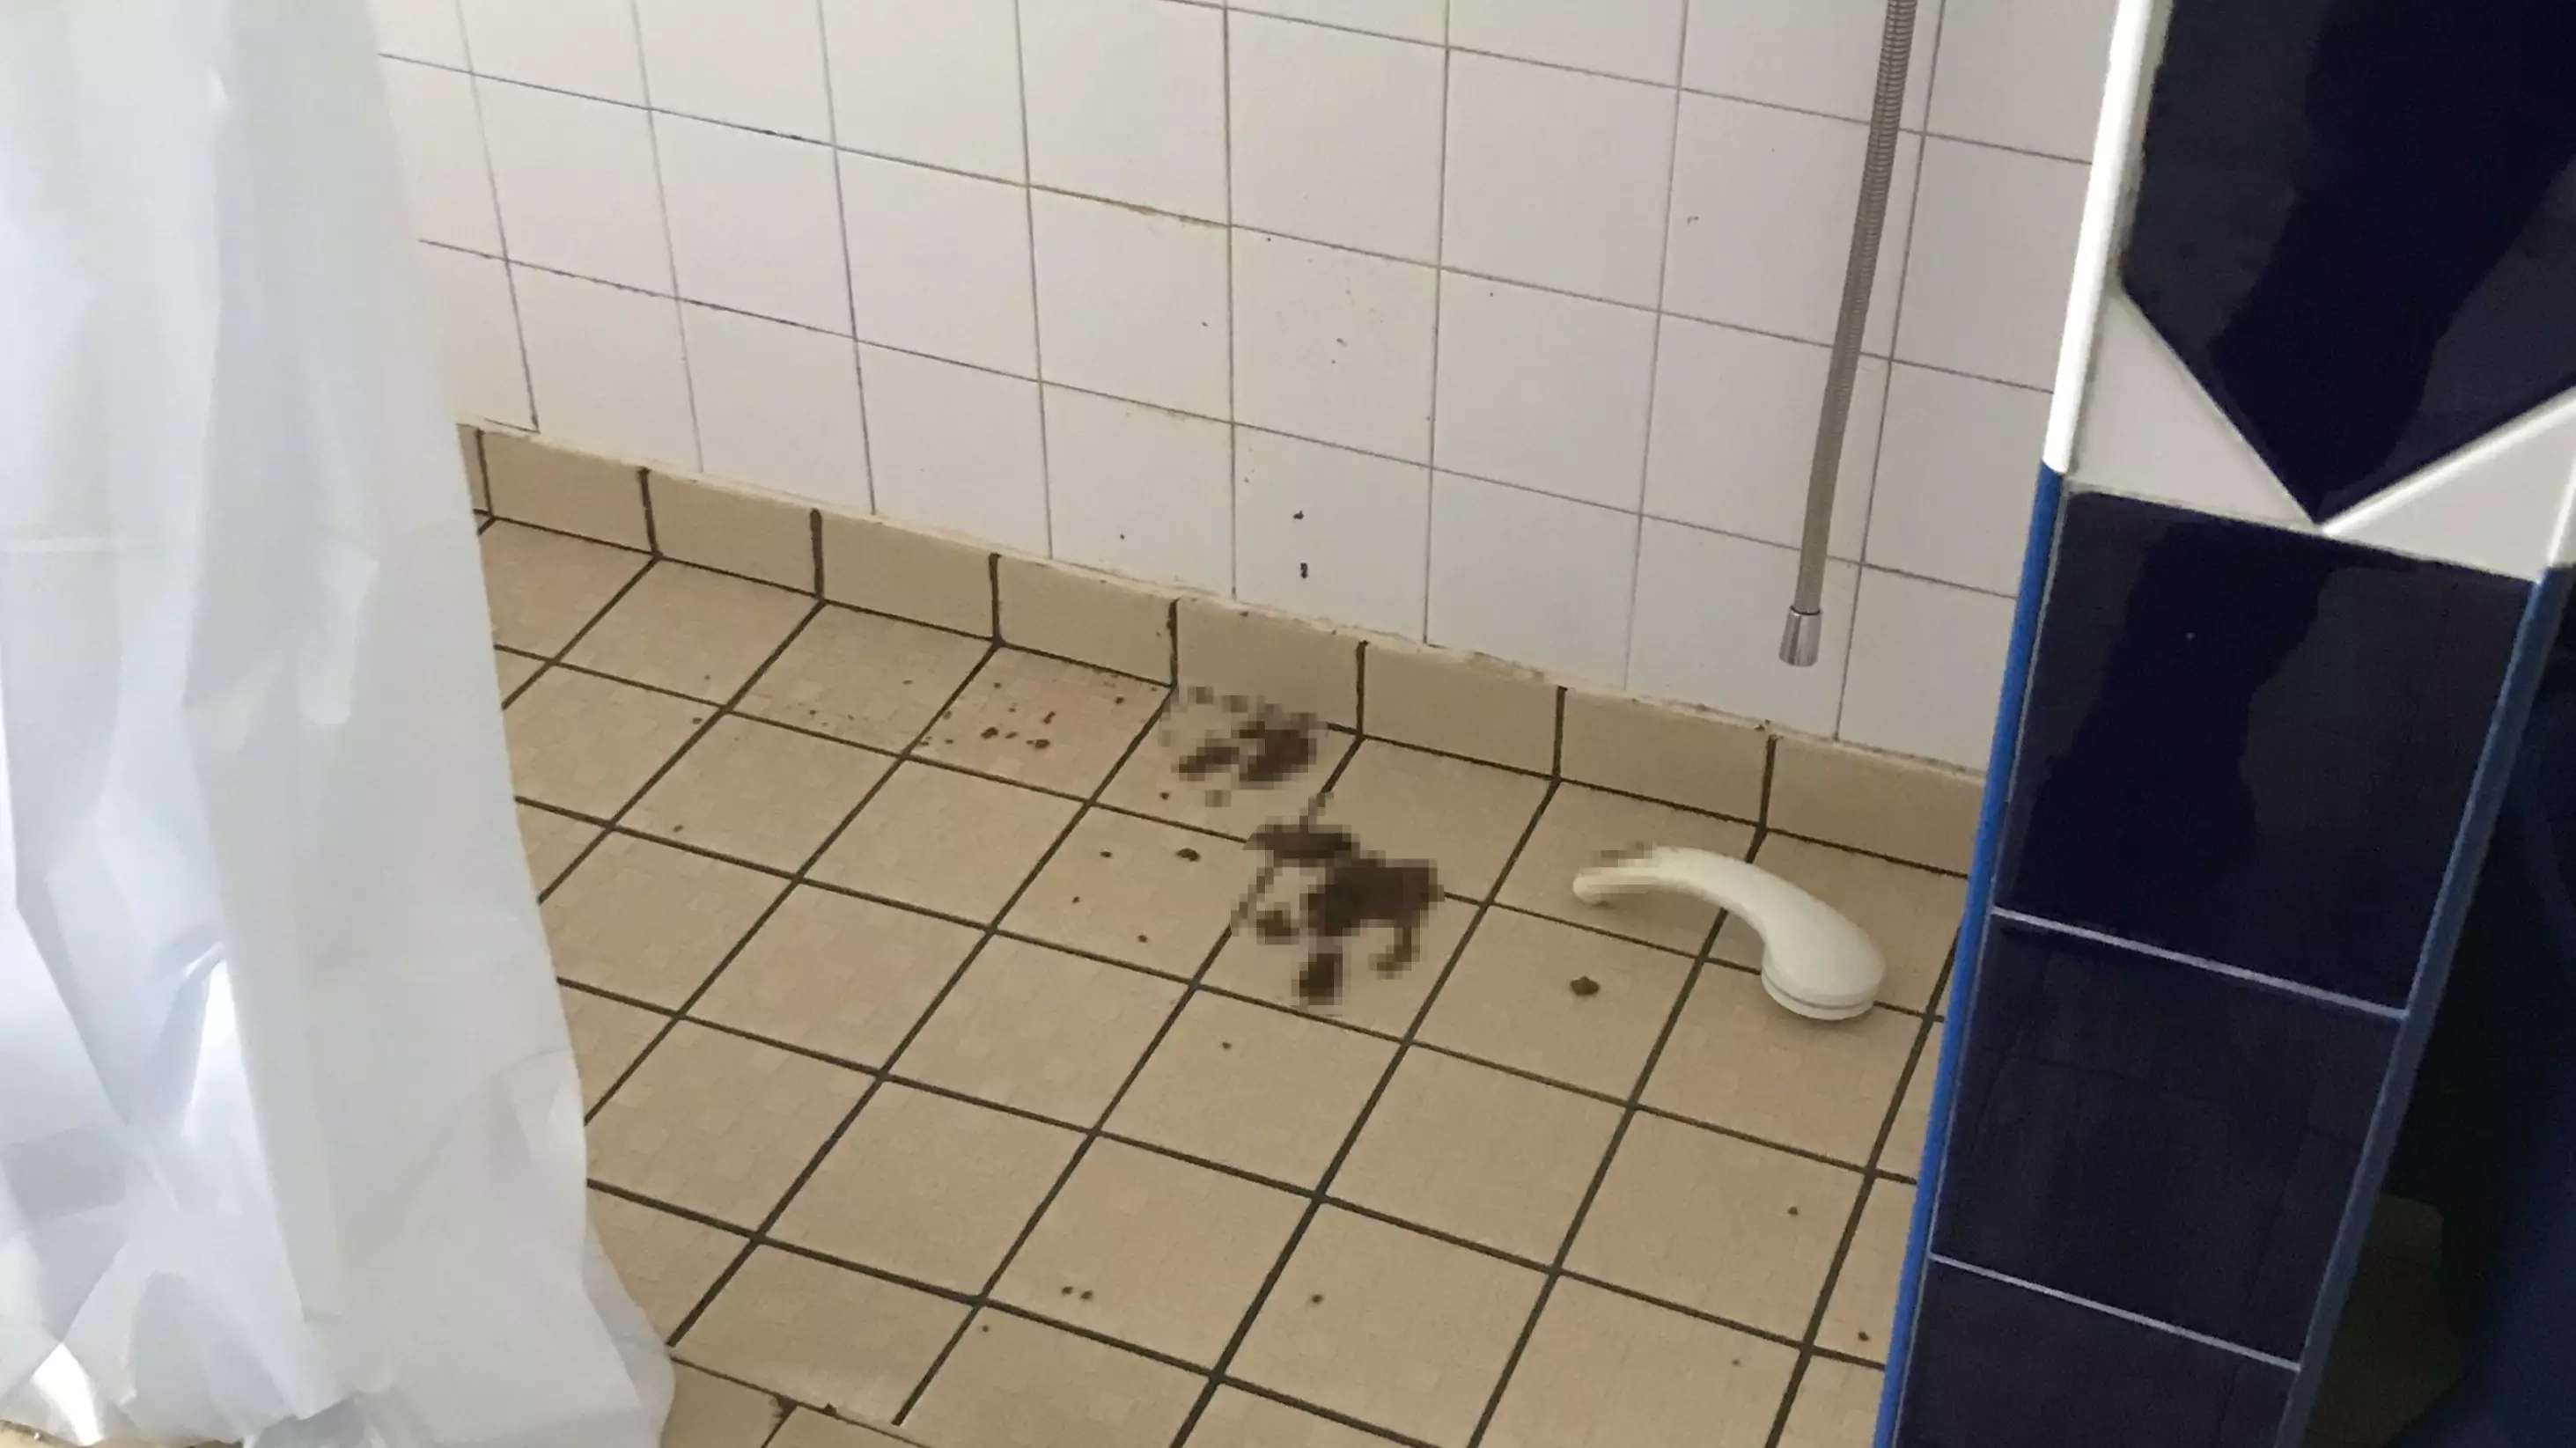 You Don't Squat like That! Gym Staff Horror as Man Defecates in Gym Showers